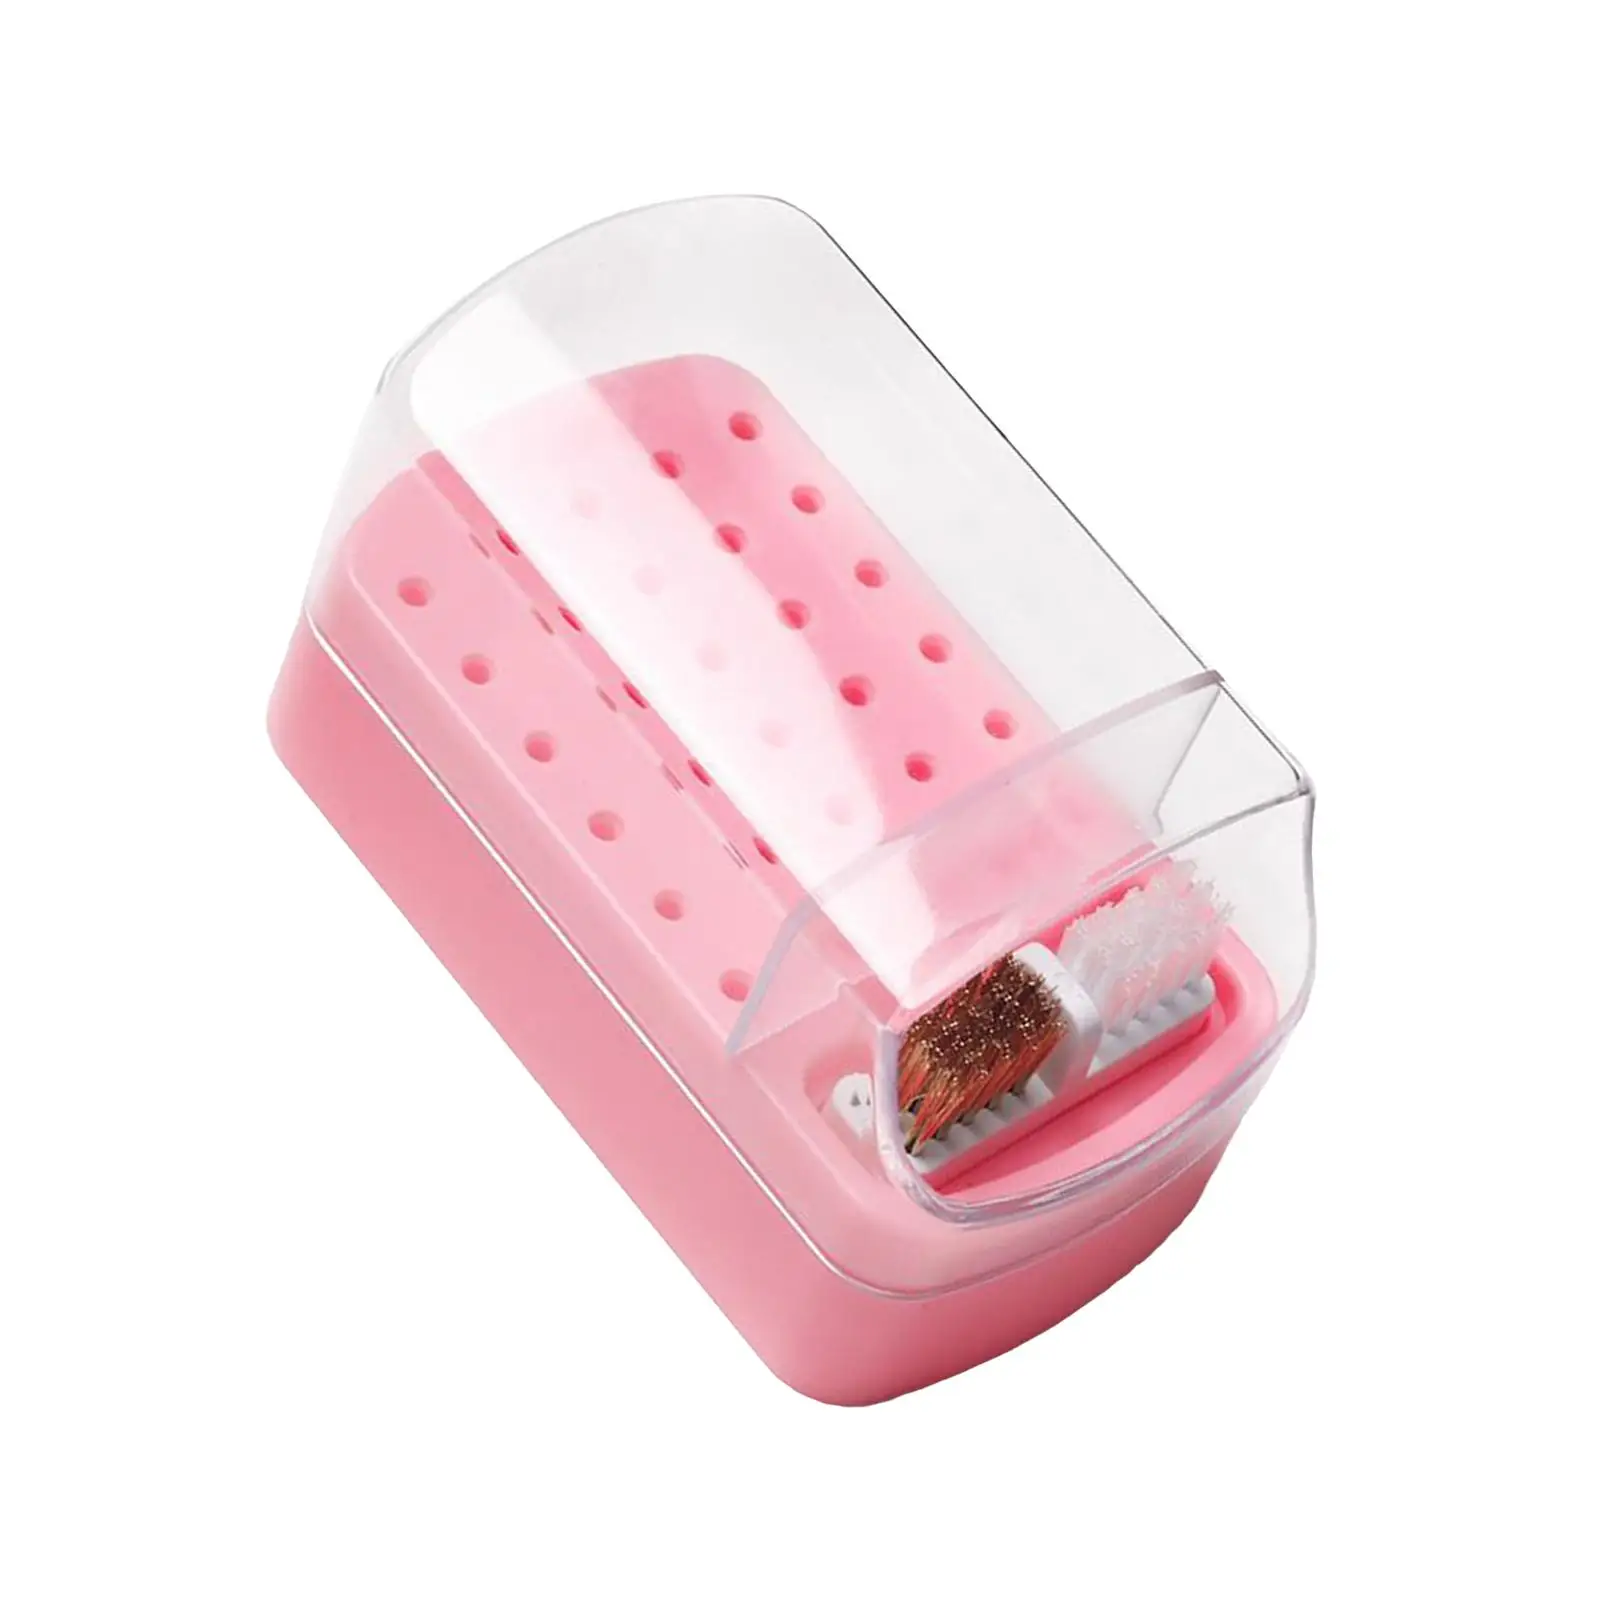 Nail Drill Bit Holder Lightweight Salon with Clear Lid Home DIY Waterproof Nail Grinding Head Polishing Bits Carrying Case